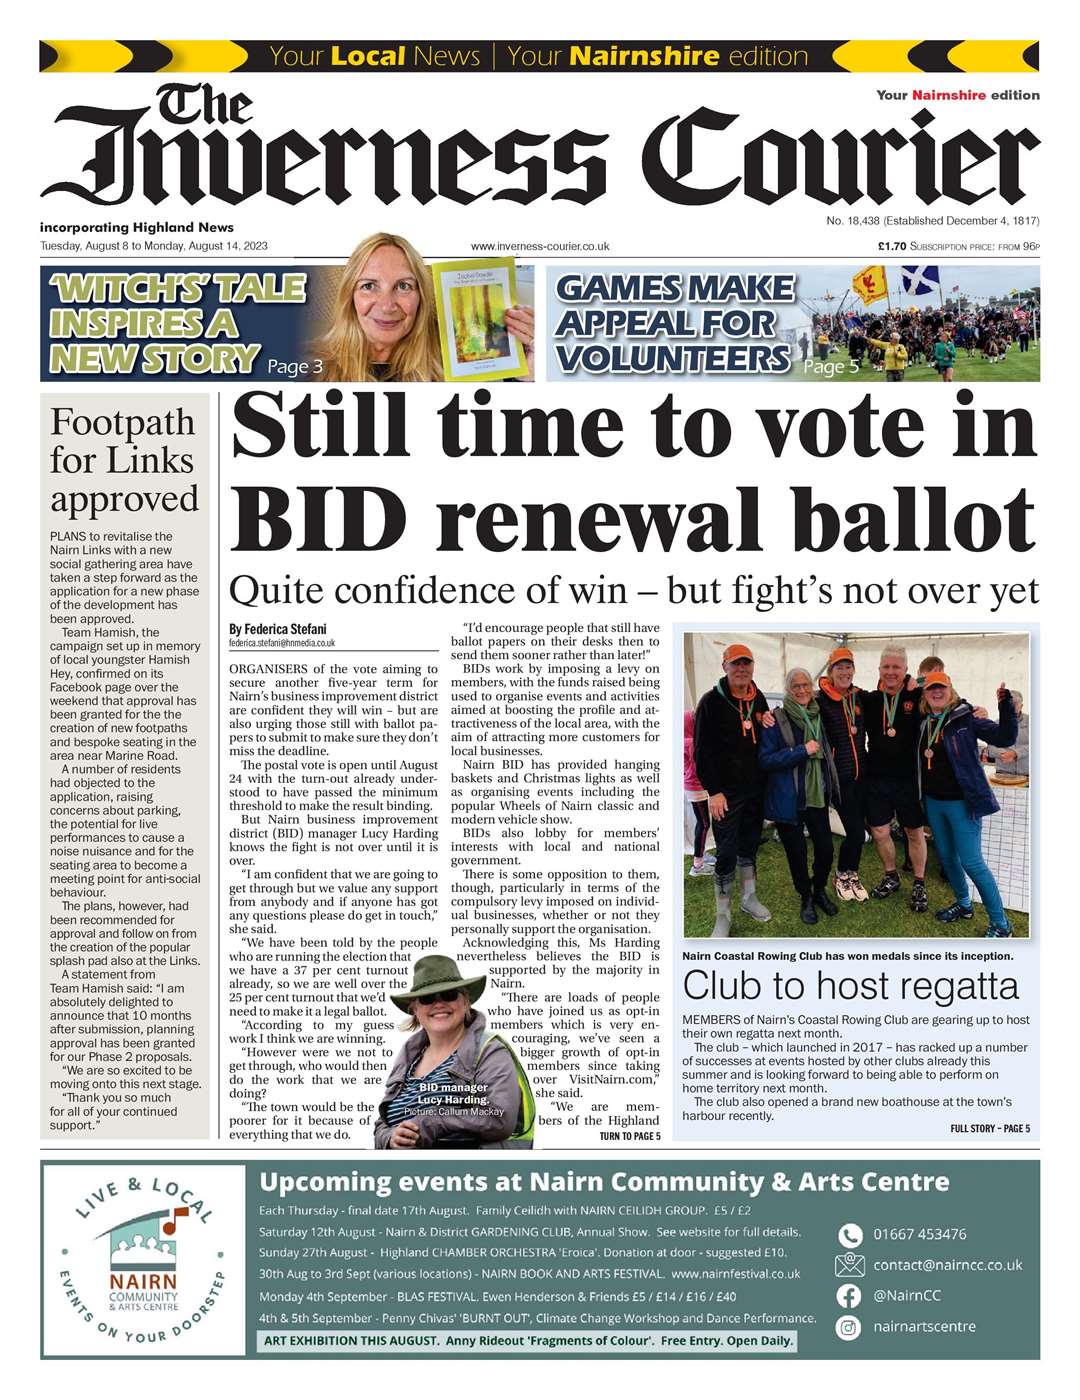 The Inverness Courier (Nairnshire edition), August 8, front page.